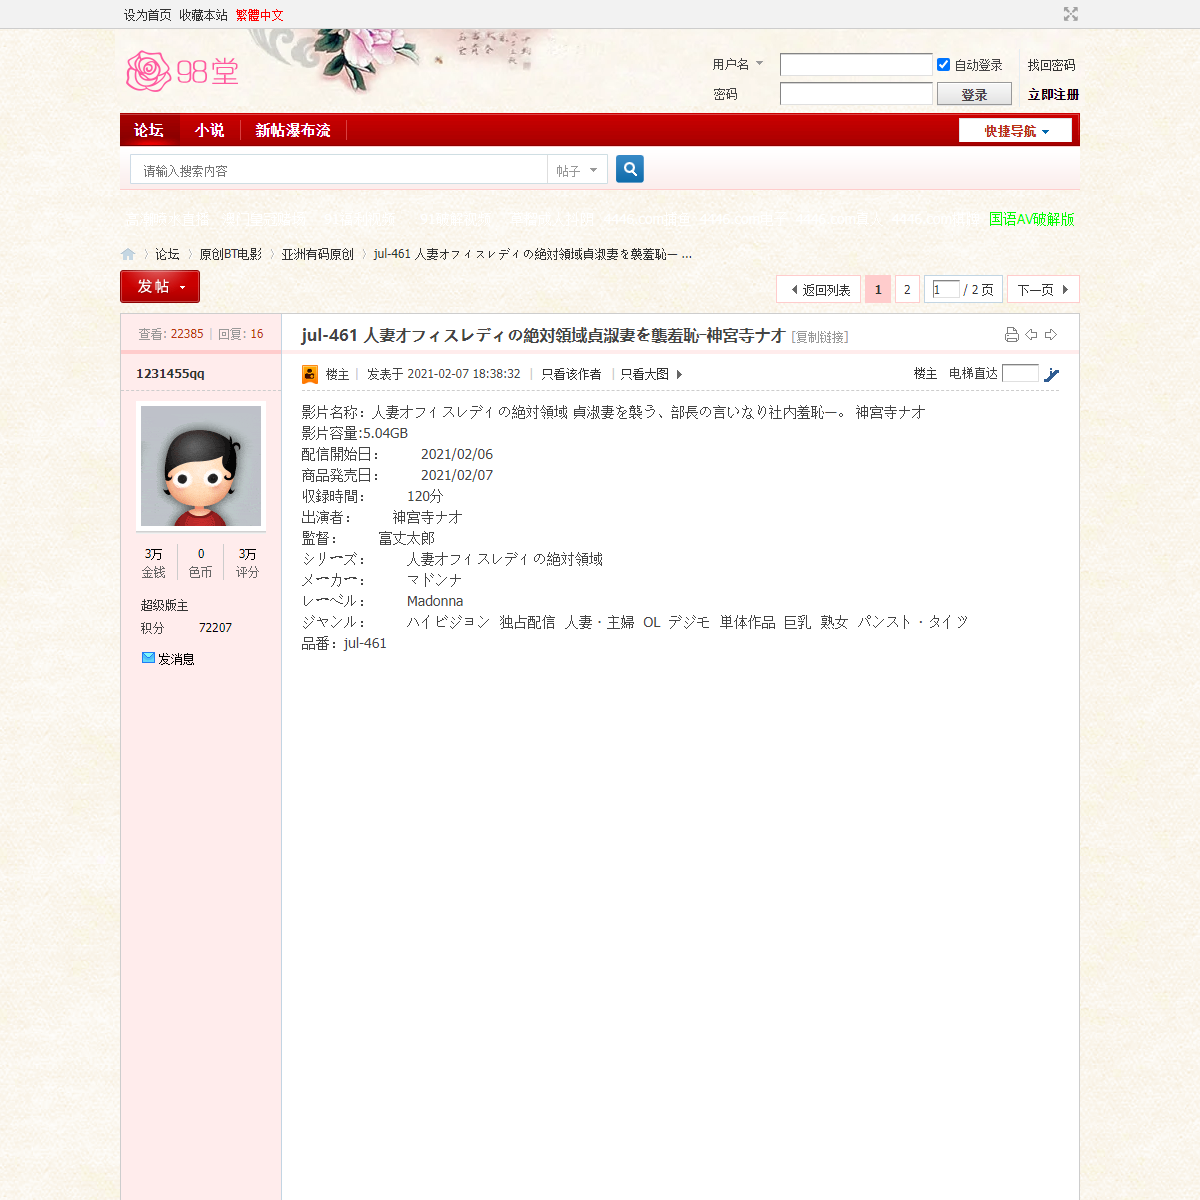 A complete backup of https://www.sehuatang.net/thread-477279-1-1.html